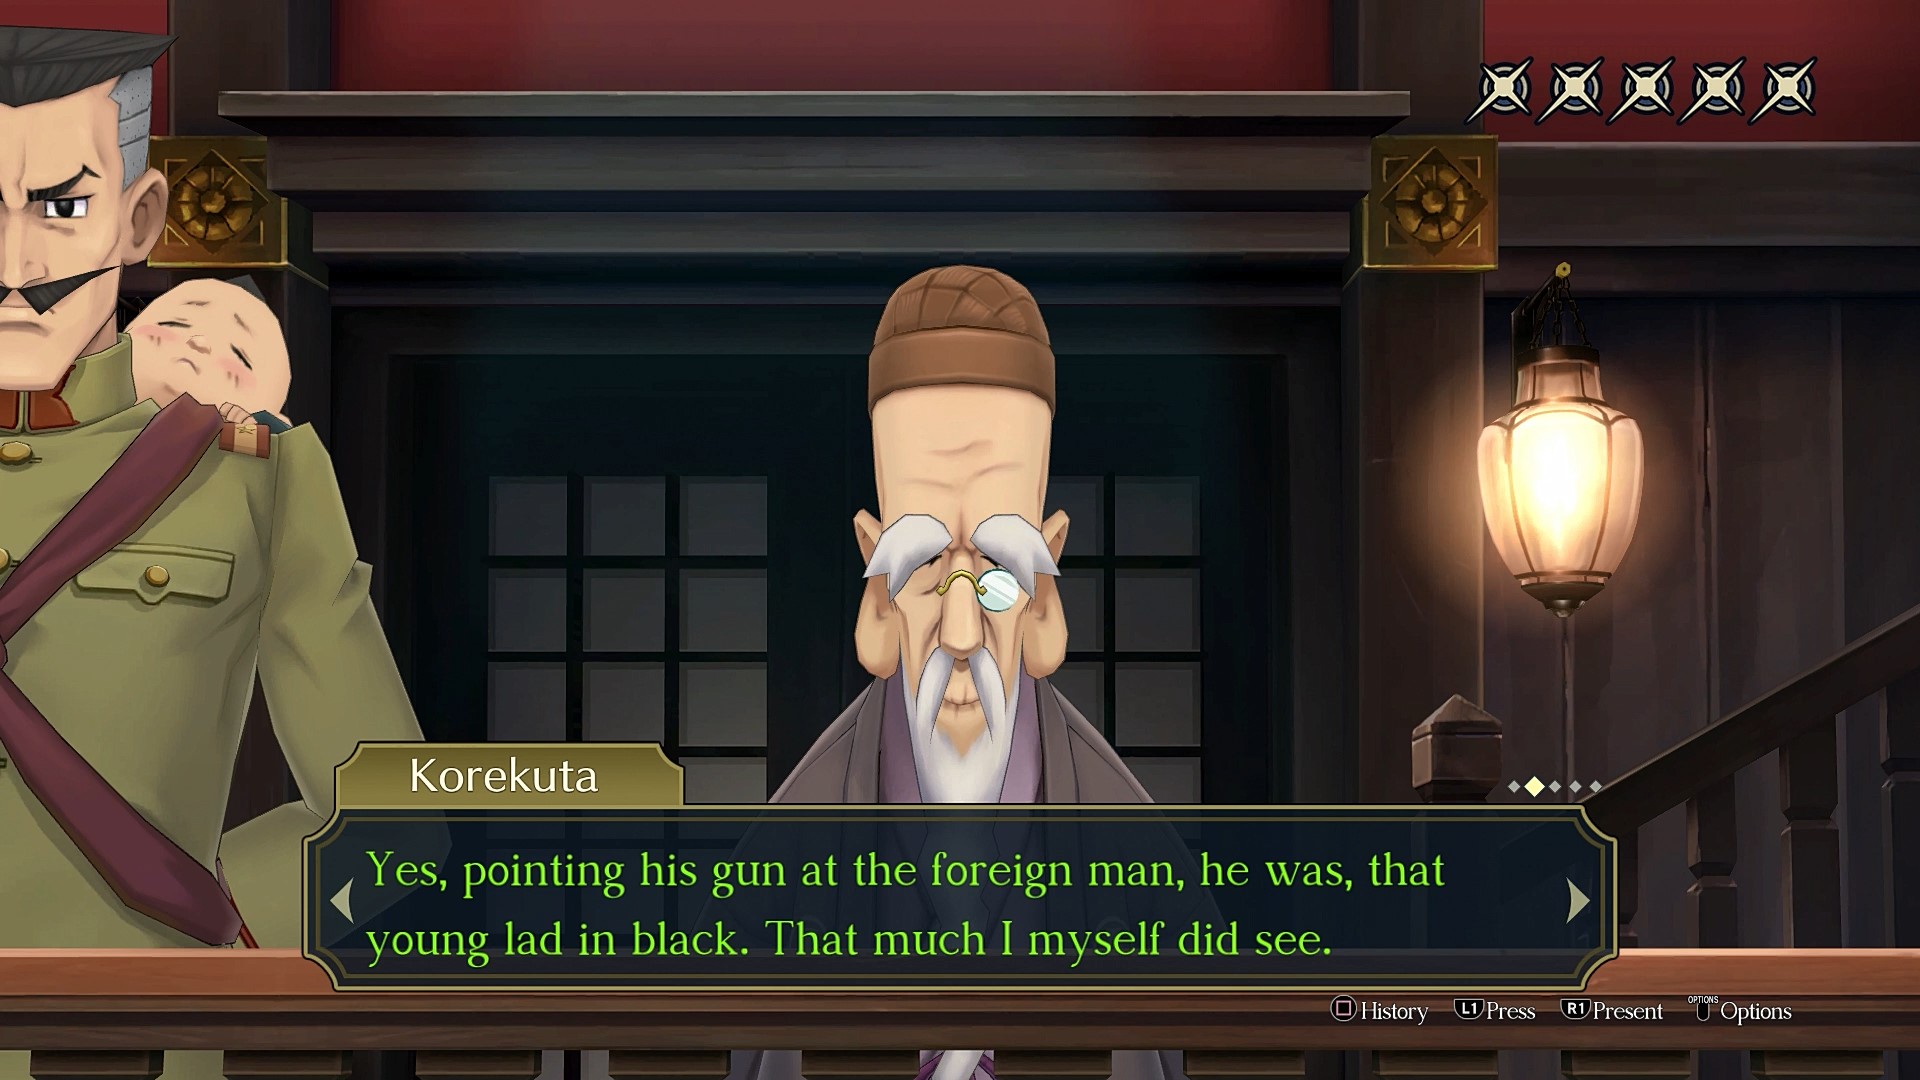 The Great Ace Attorney Chronicles - Preview - PSX Brasil